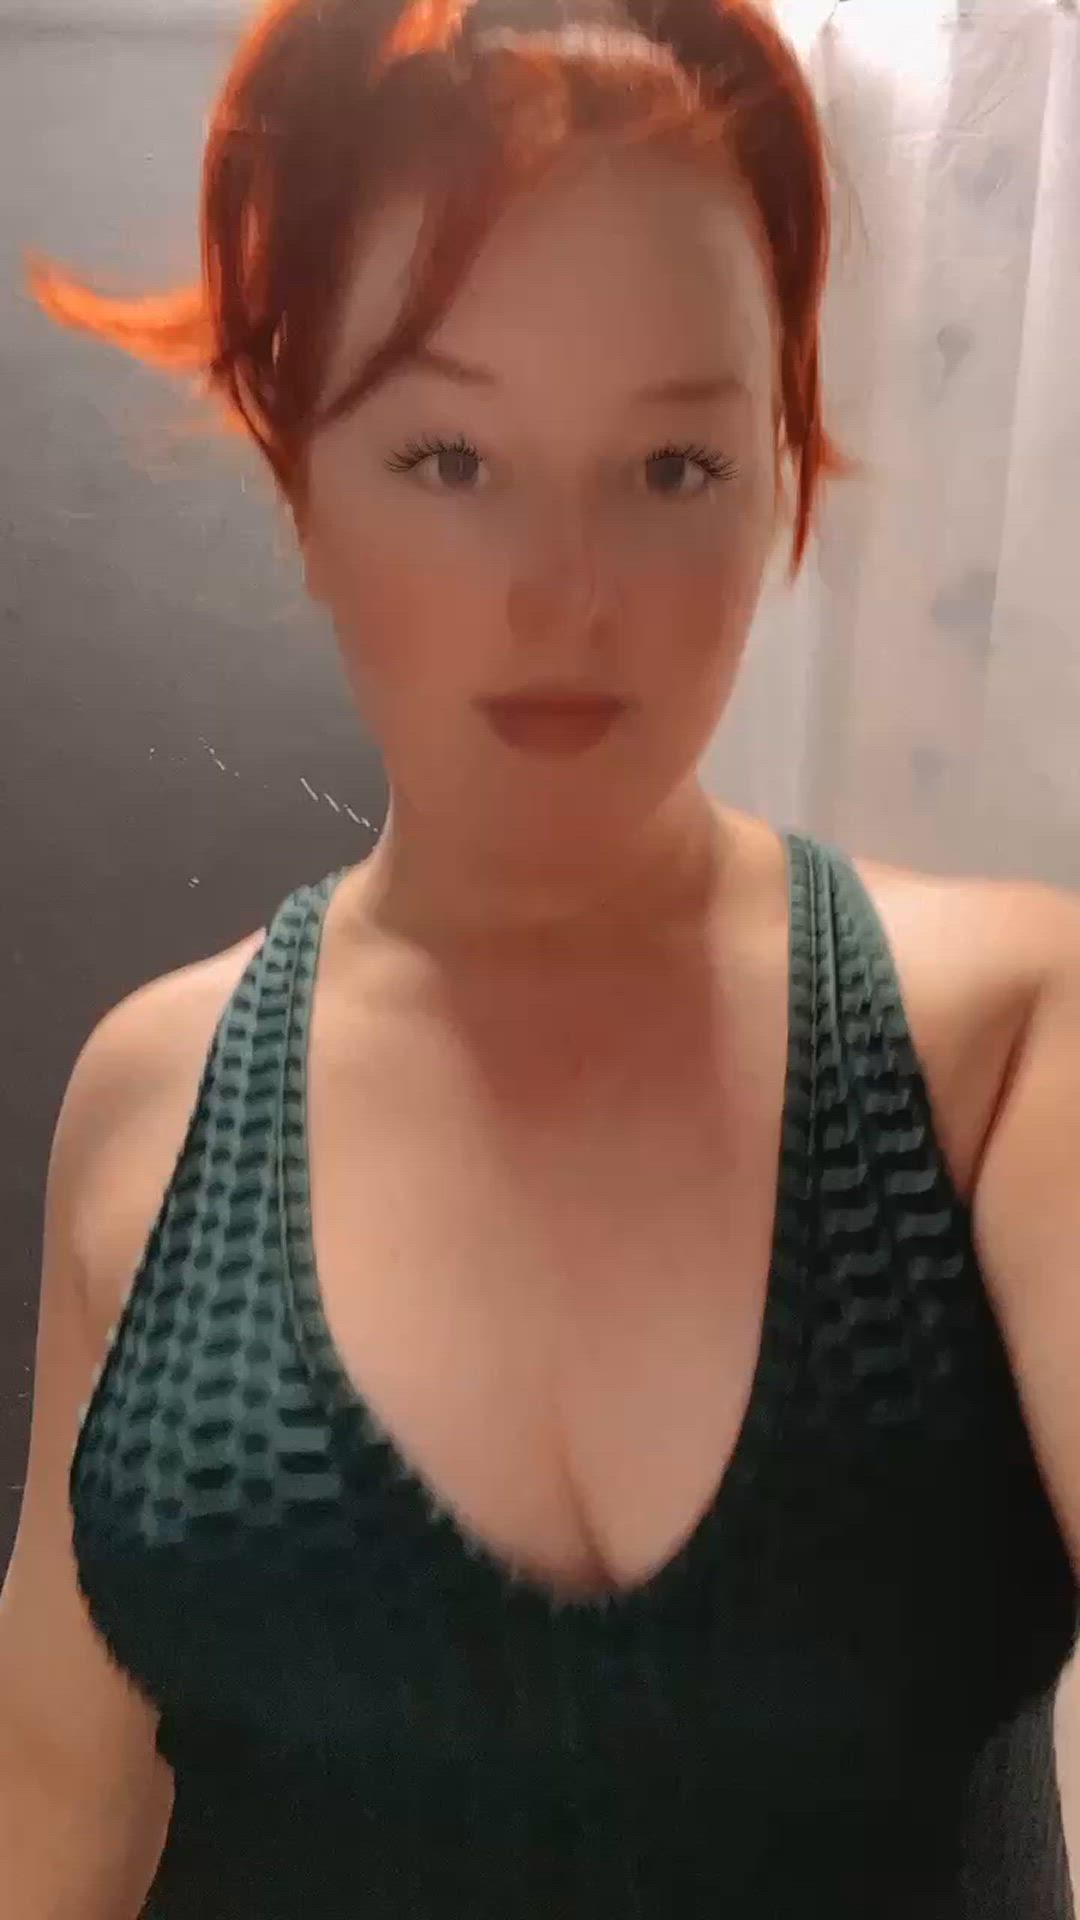 Boobs porn video with onlyfans model misslucysweets <strong>@lucylincolnspage</strong>